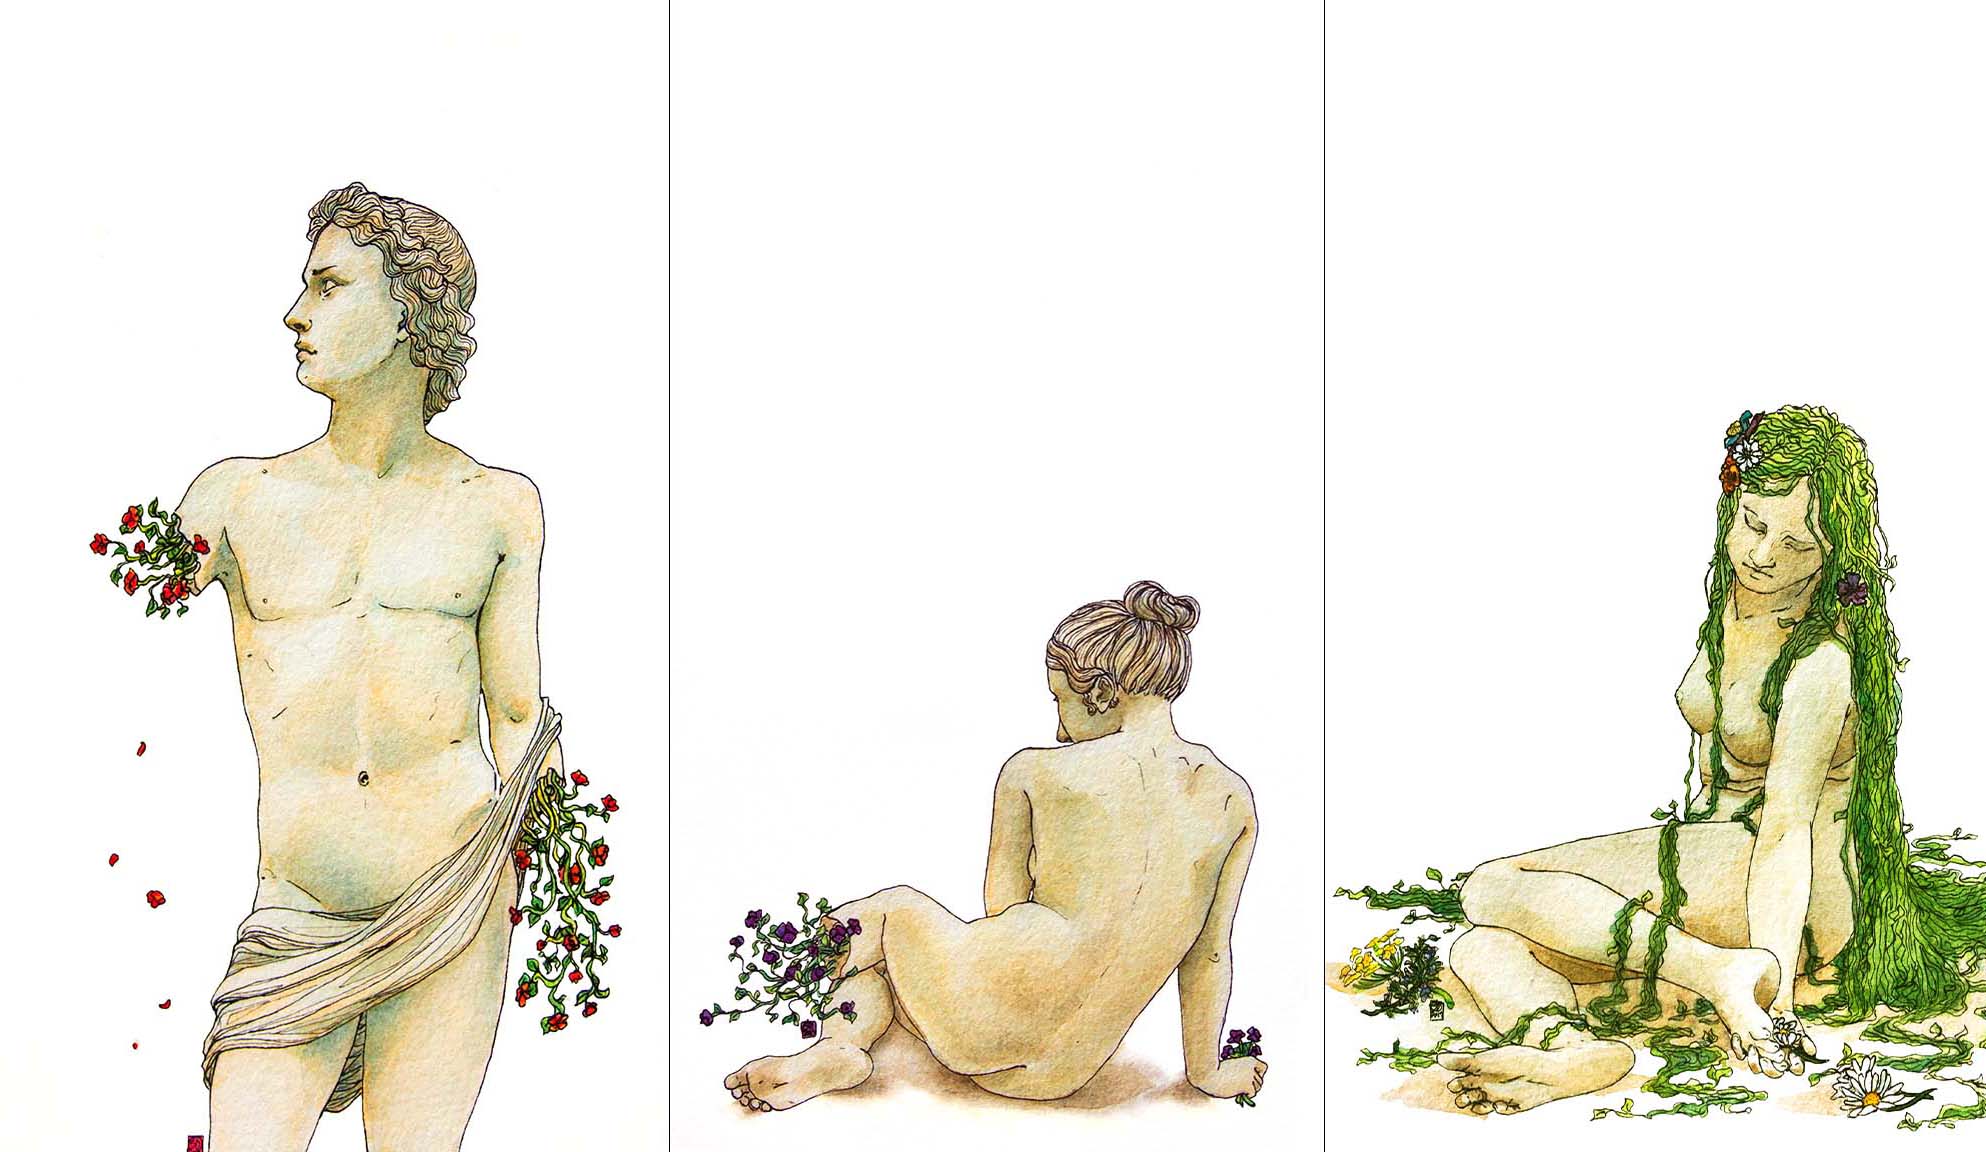 Drawings of classical statues adorned with flowers